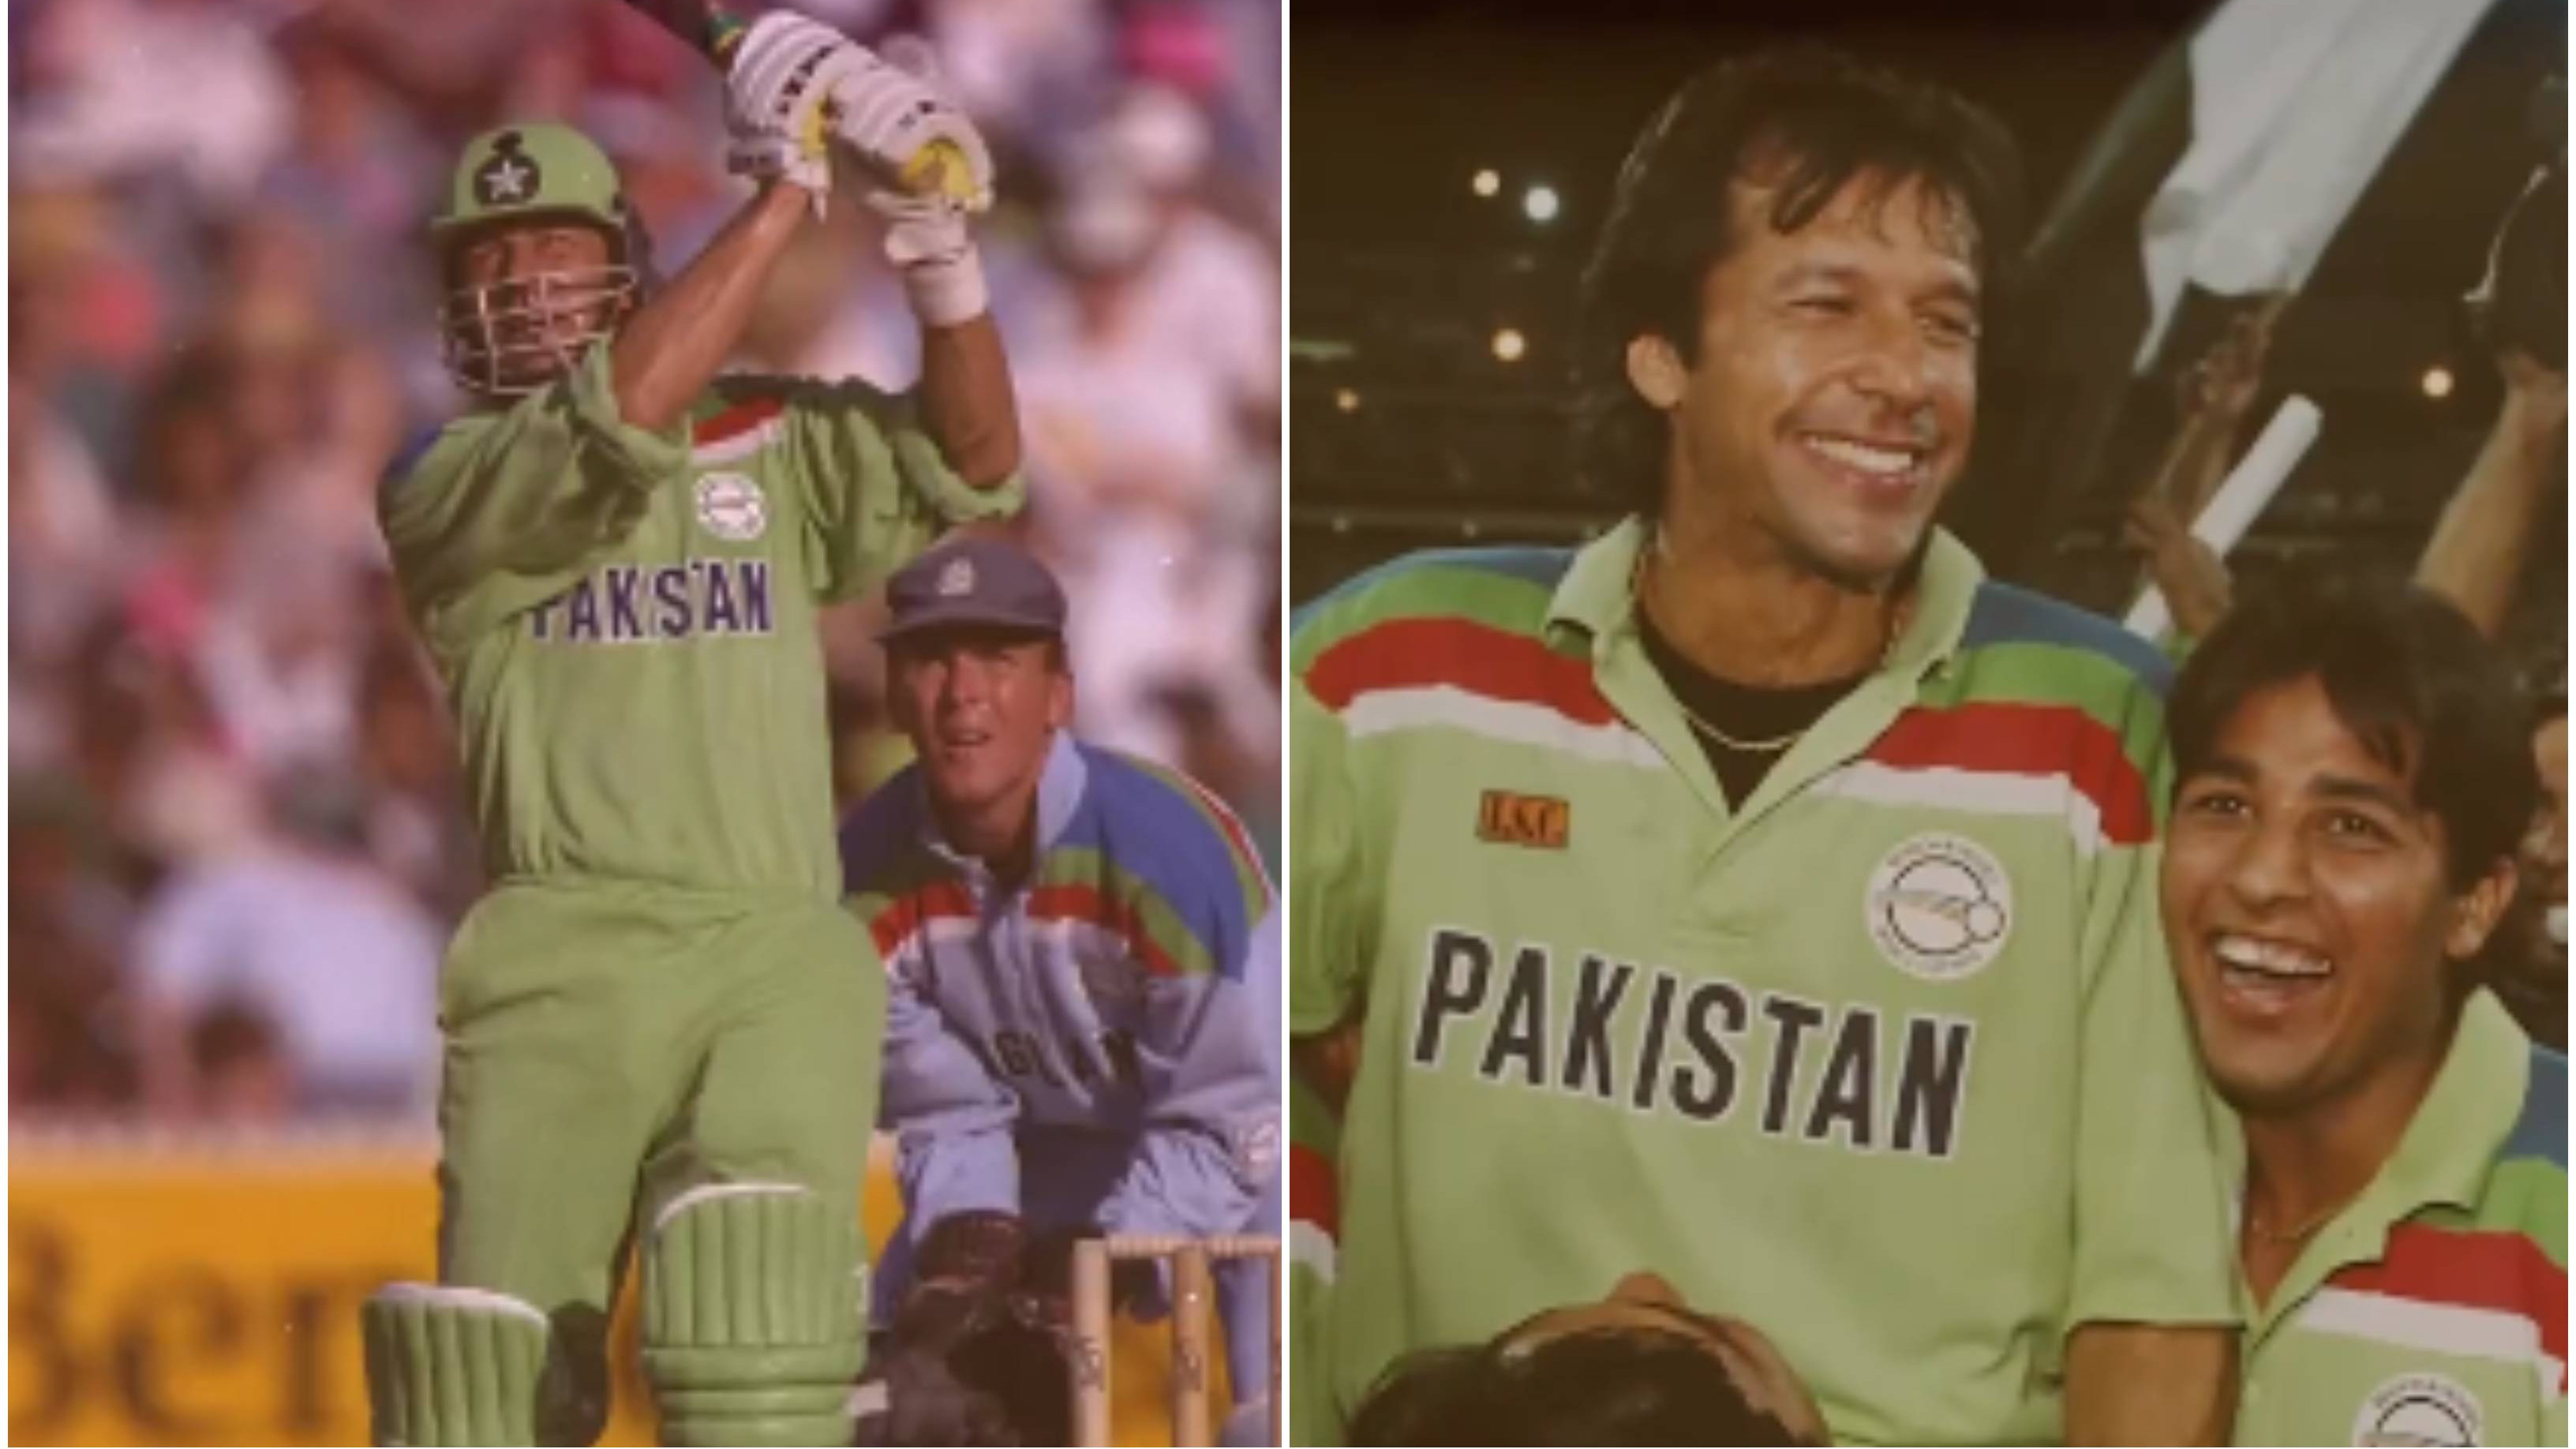 WATCH: PCB adds Imran Khan in new promotional video after social media backlash